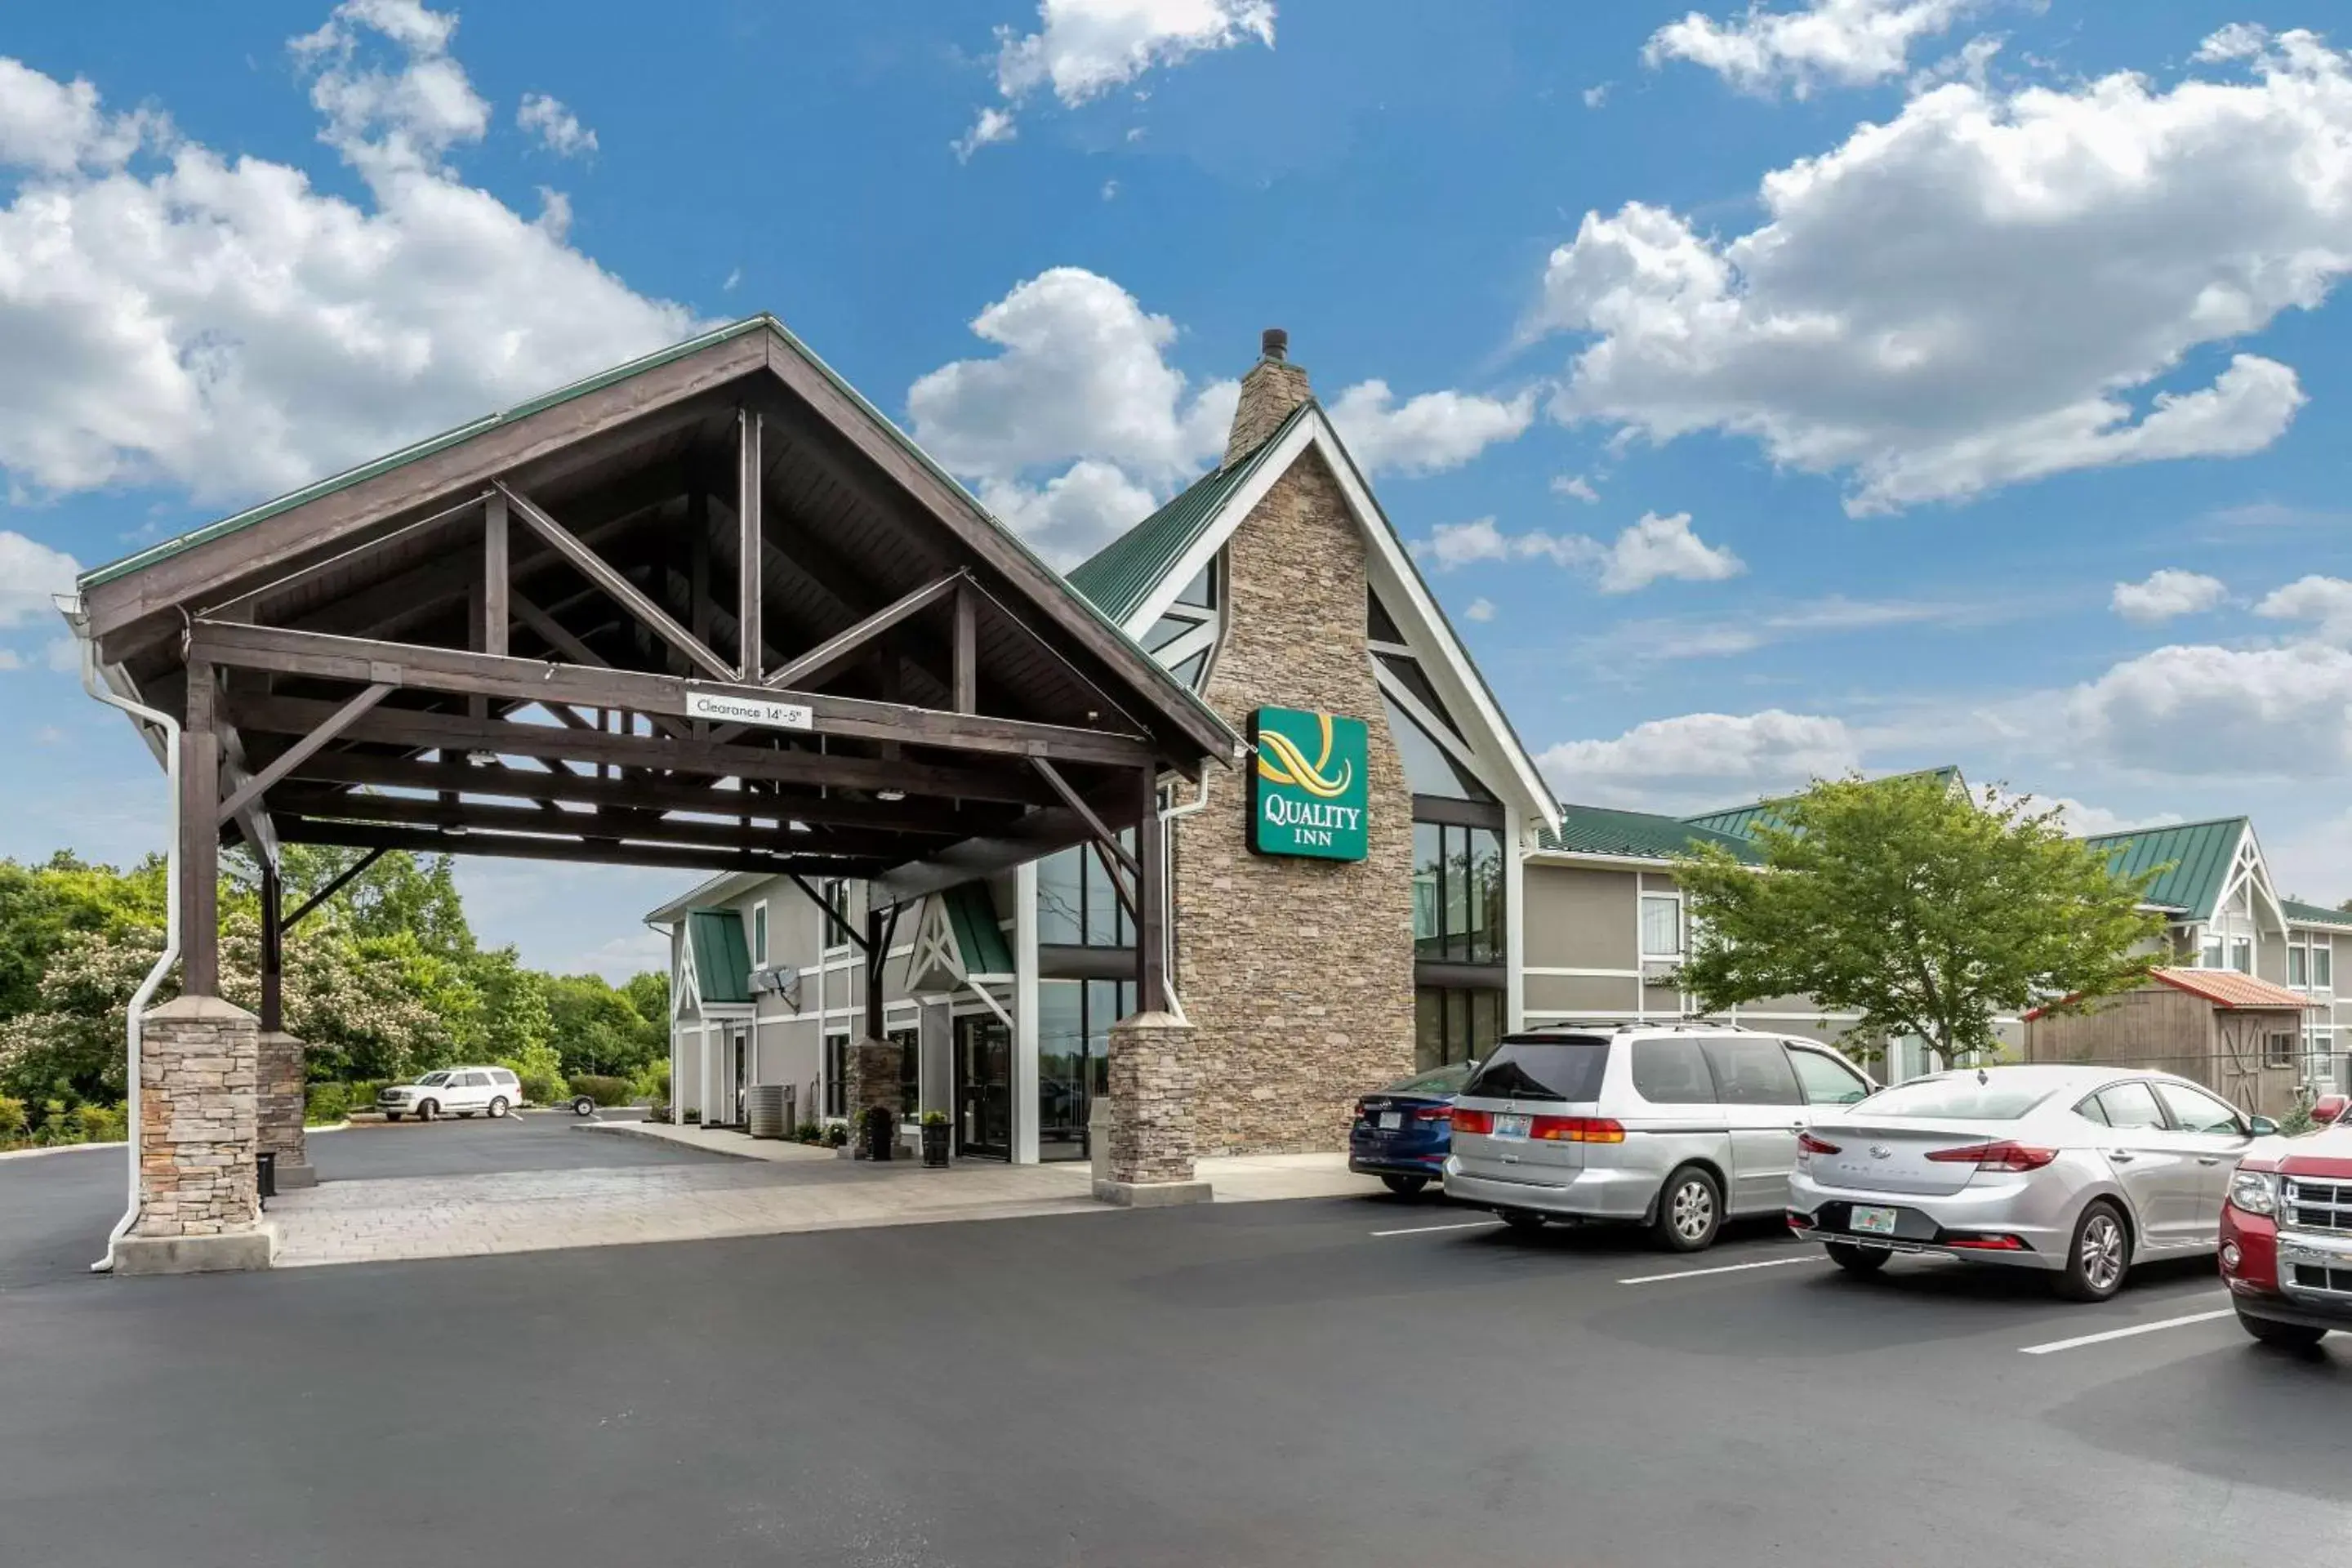 Property Building in Quality Inn Monteagle TN